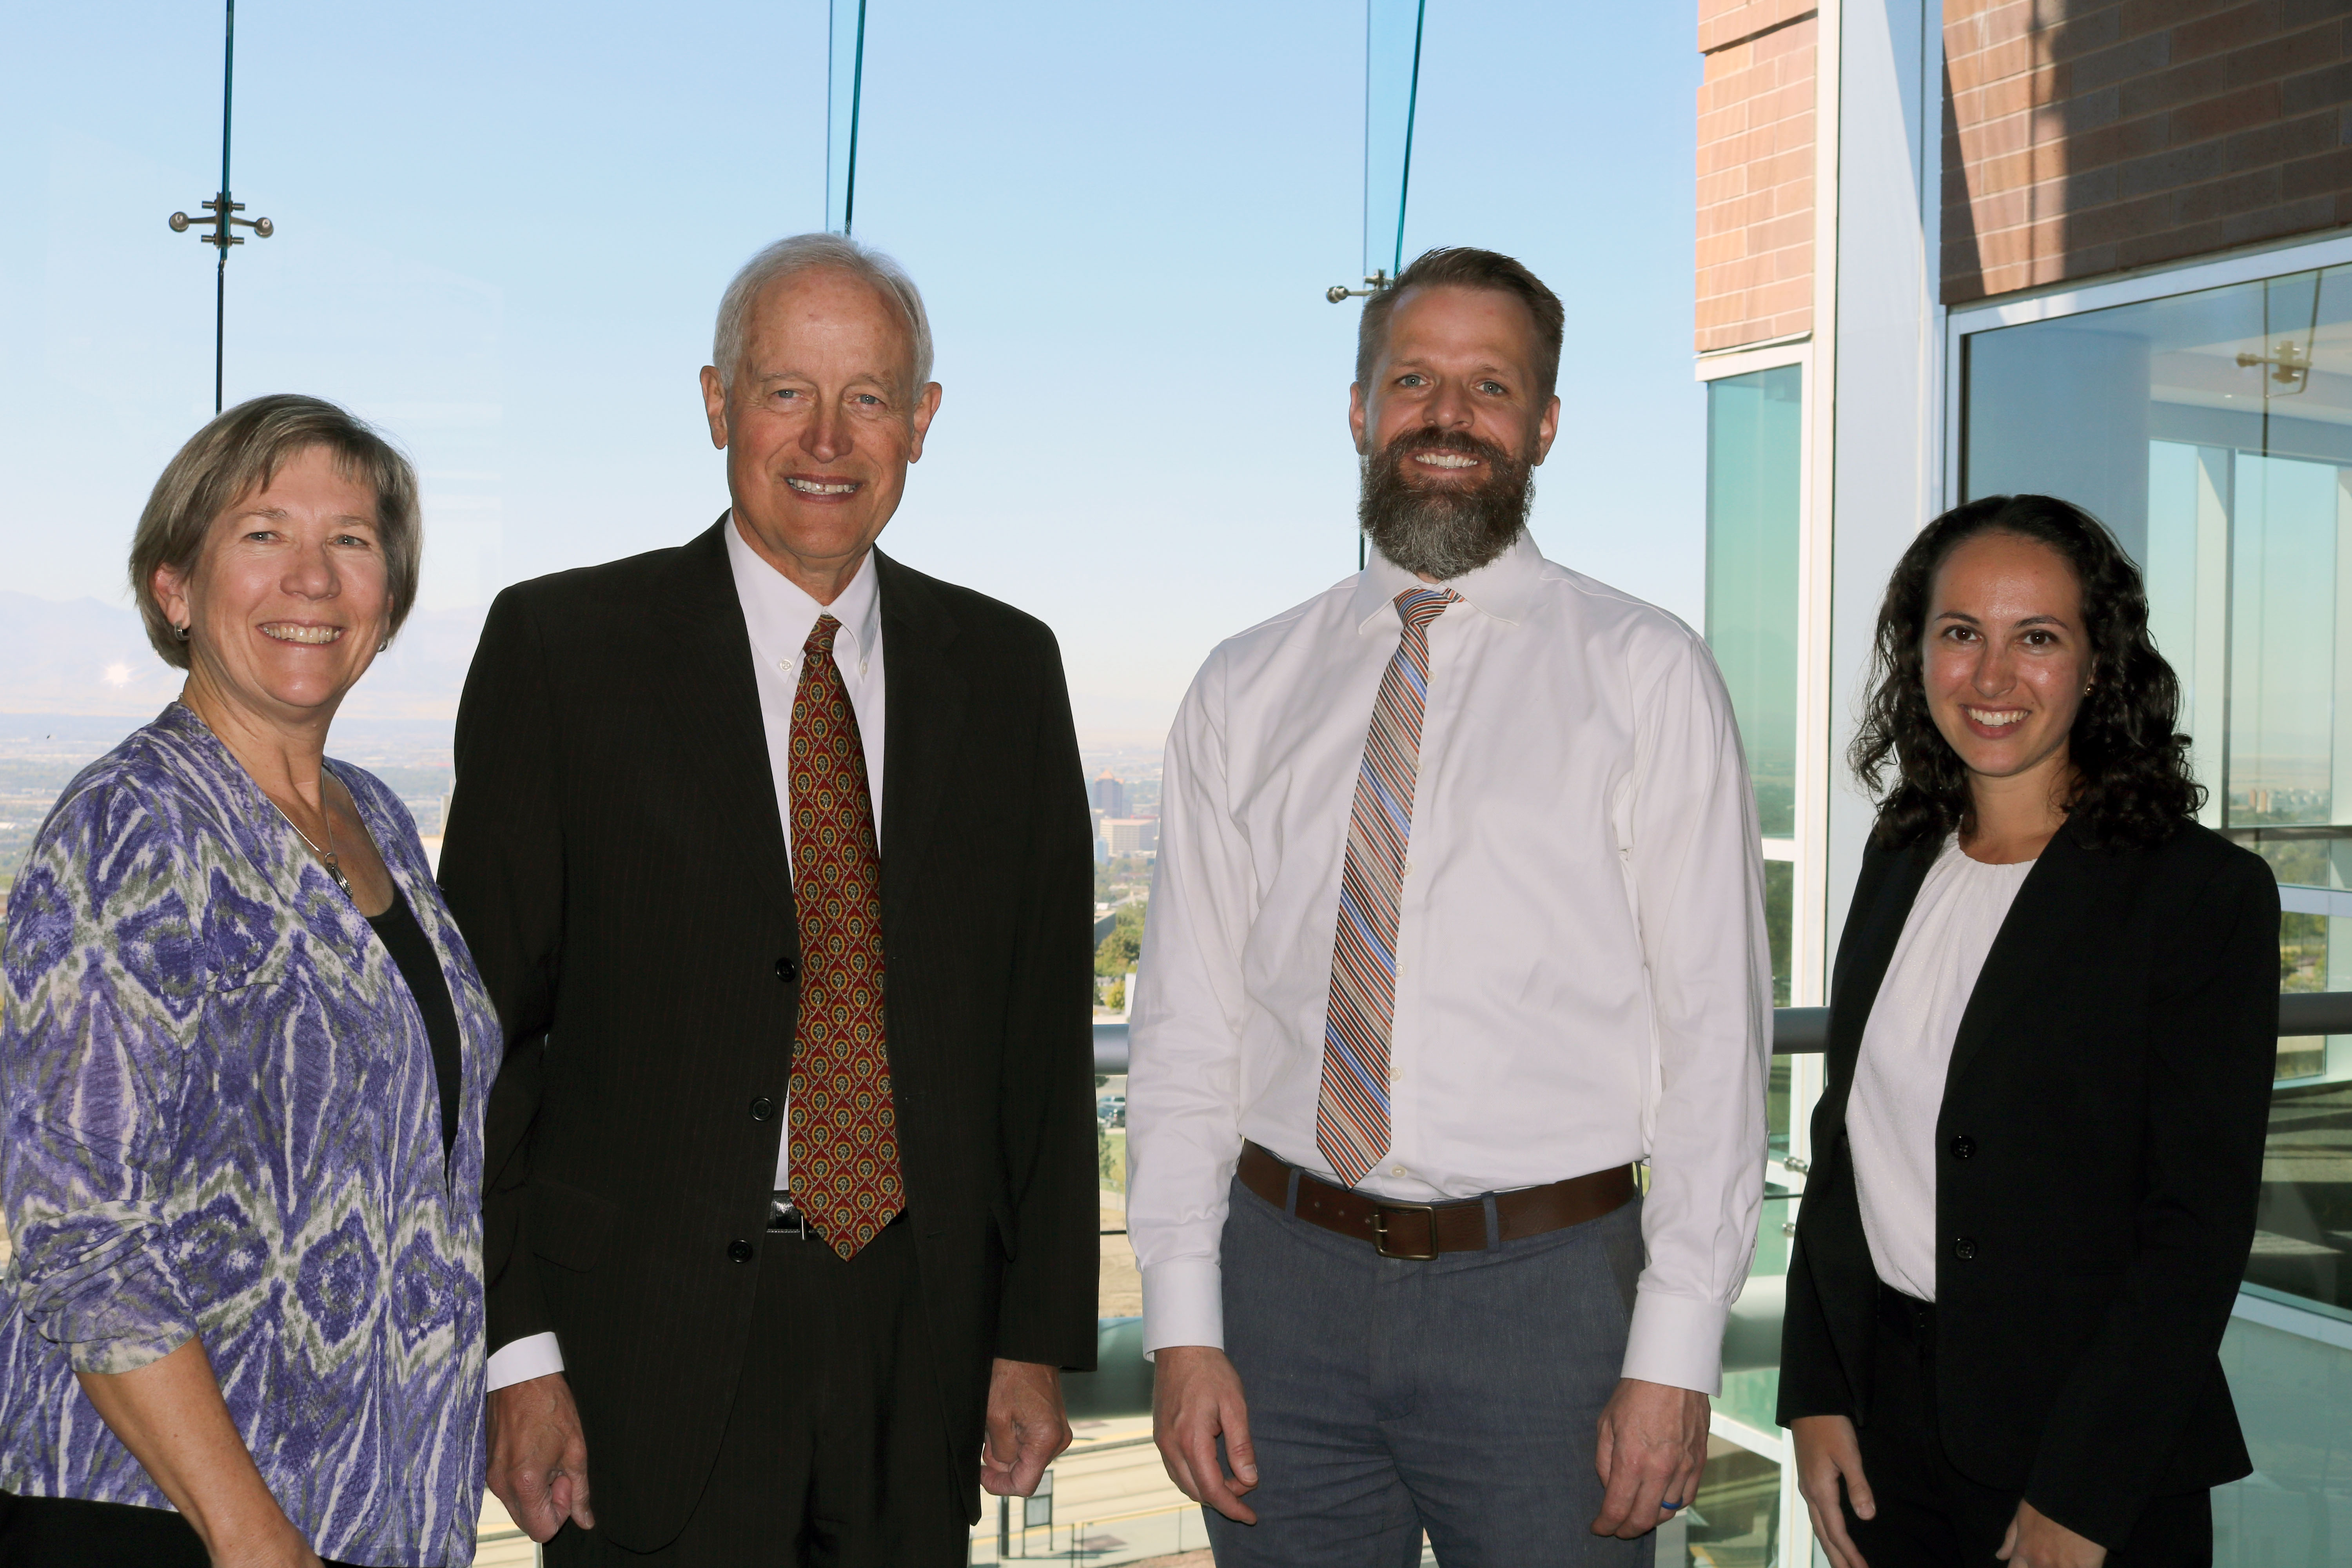 From left to right: ARCS Foundation Utah President Sue Dintelman, Moran Eye Center CEO Randall J Olson, MD, Moran Vice Chair of Education Jeff Pettey, MD, and 2018 ARCS Scholar Ariana Levin, MD.